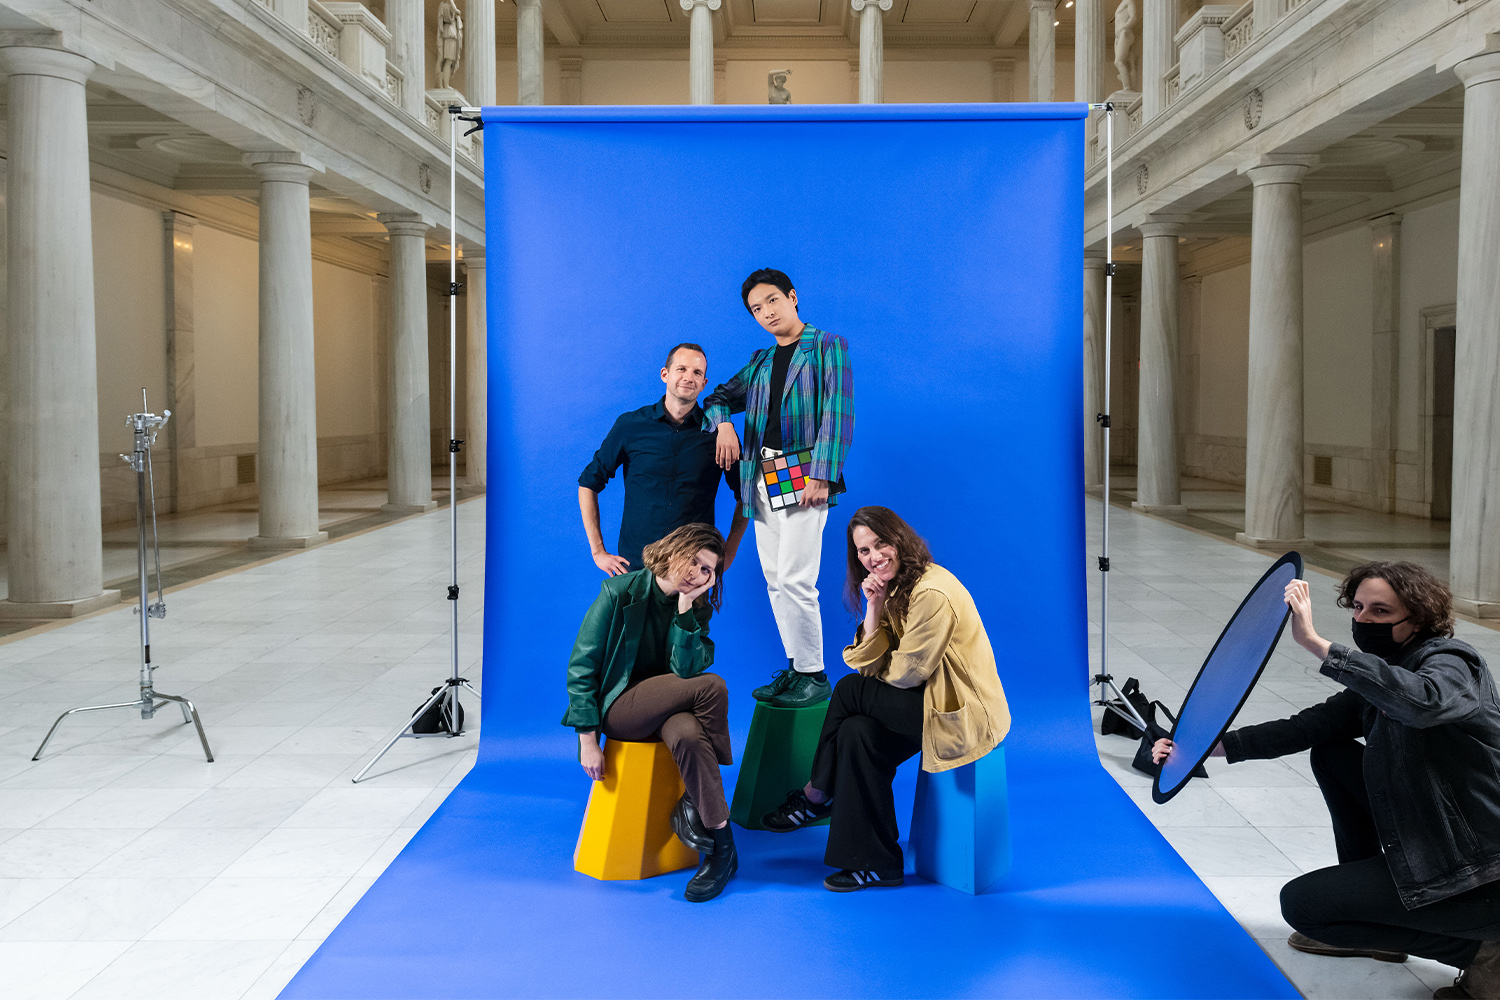 People pose for a photo in front of a green screen